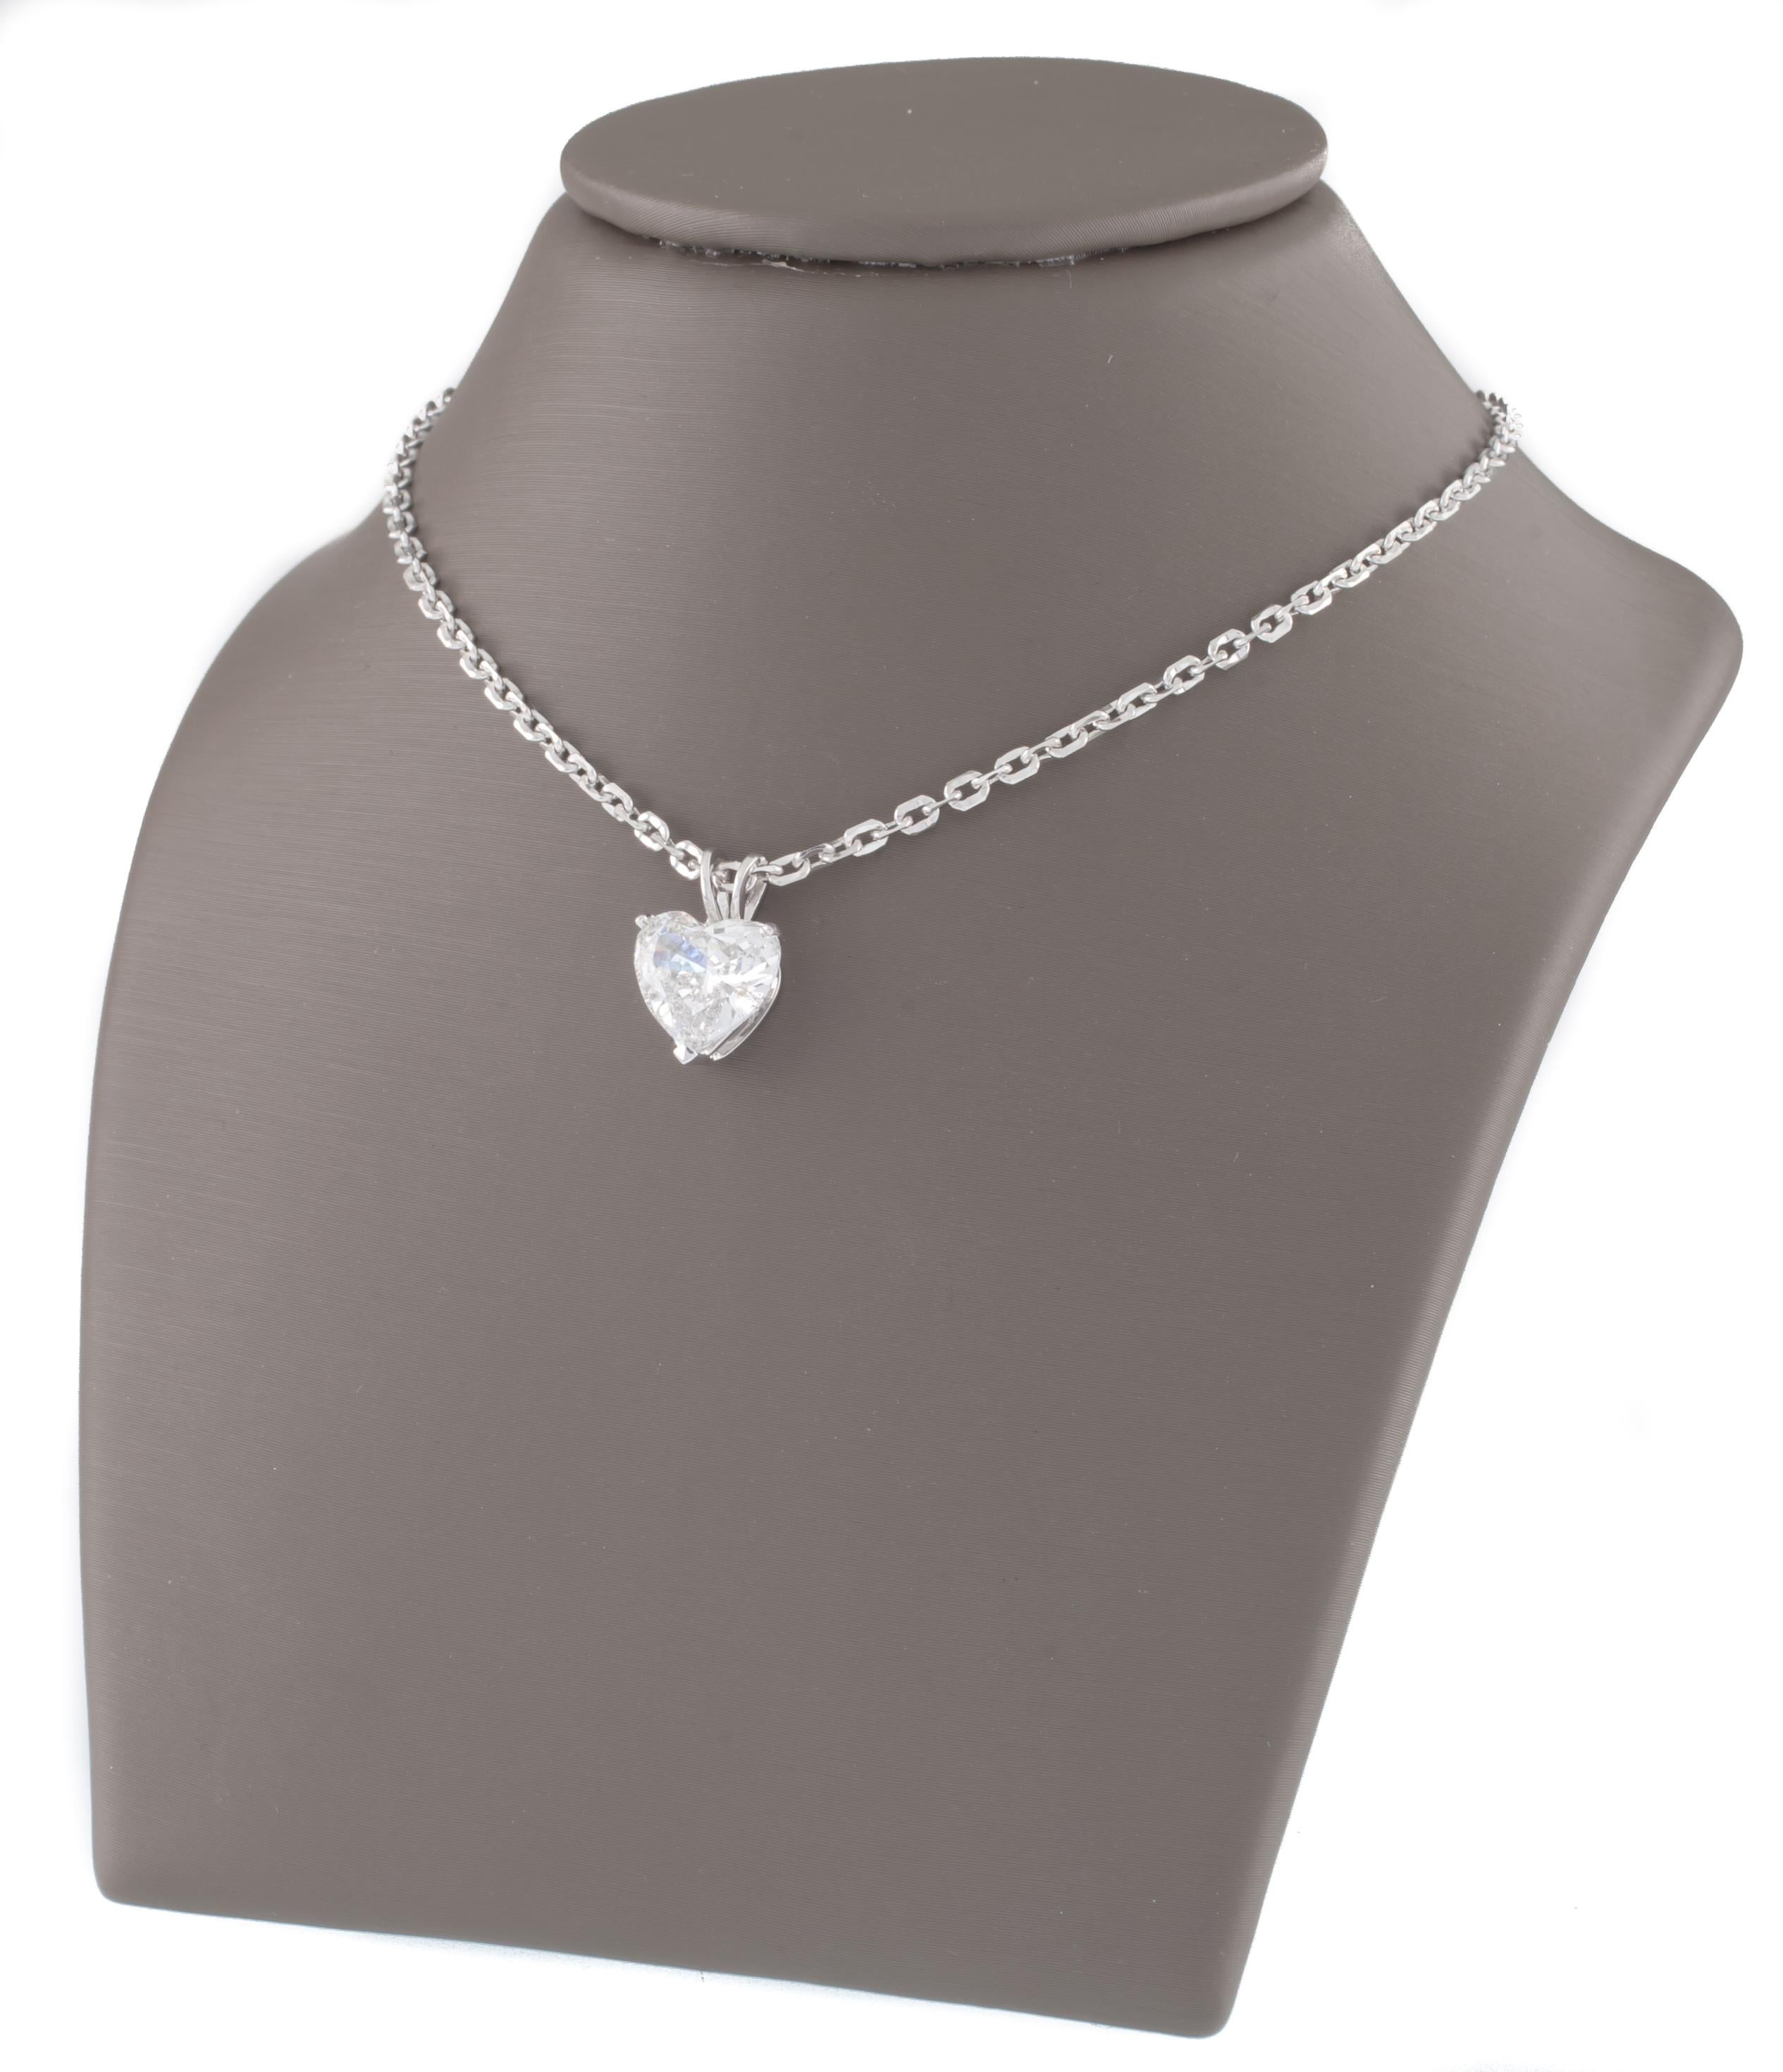 Gorgeous Heart-Shaped Diamond Solitaire Pendant!
Features 2.41 ct. Heart-Shaped Diamond
Dimensions: 9.21 mm x 8.50 mm x 4.60 mm
H-G Color
SI3 Clarity
Includes 22